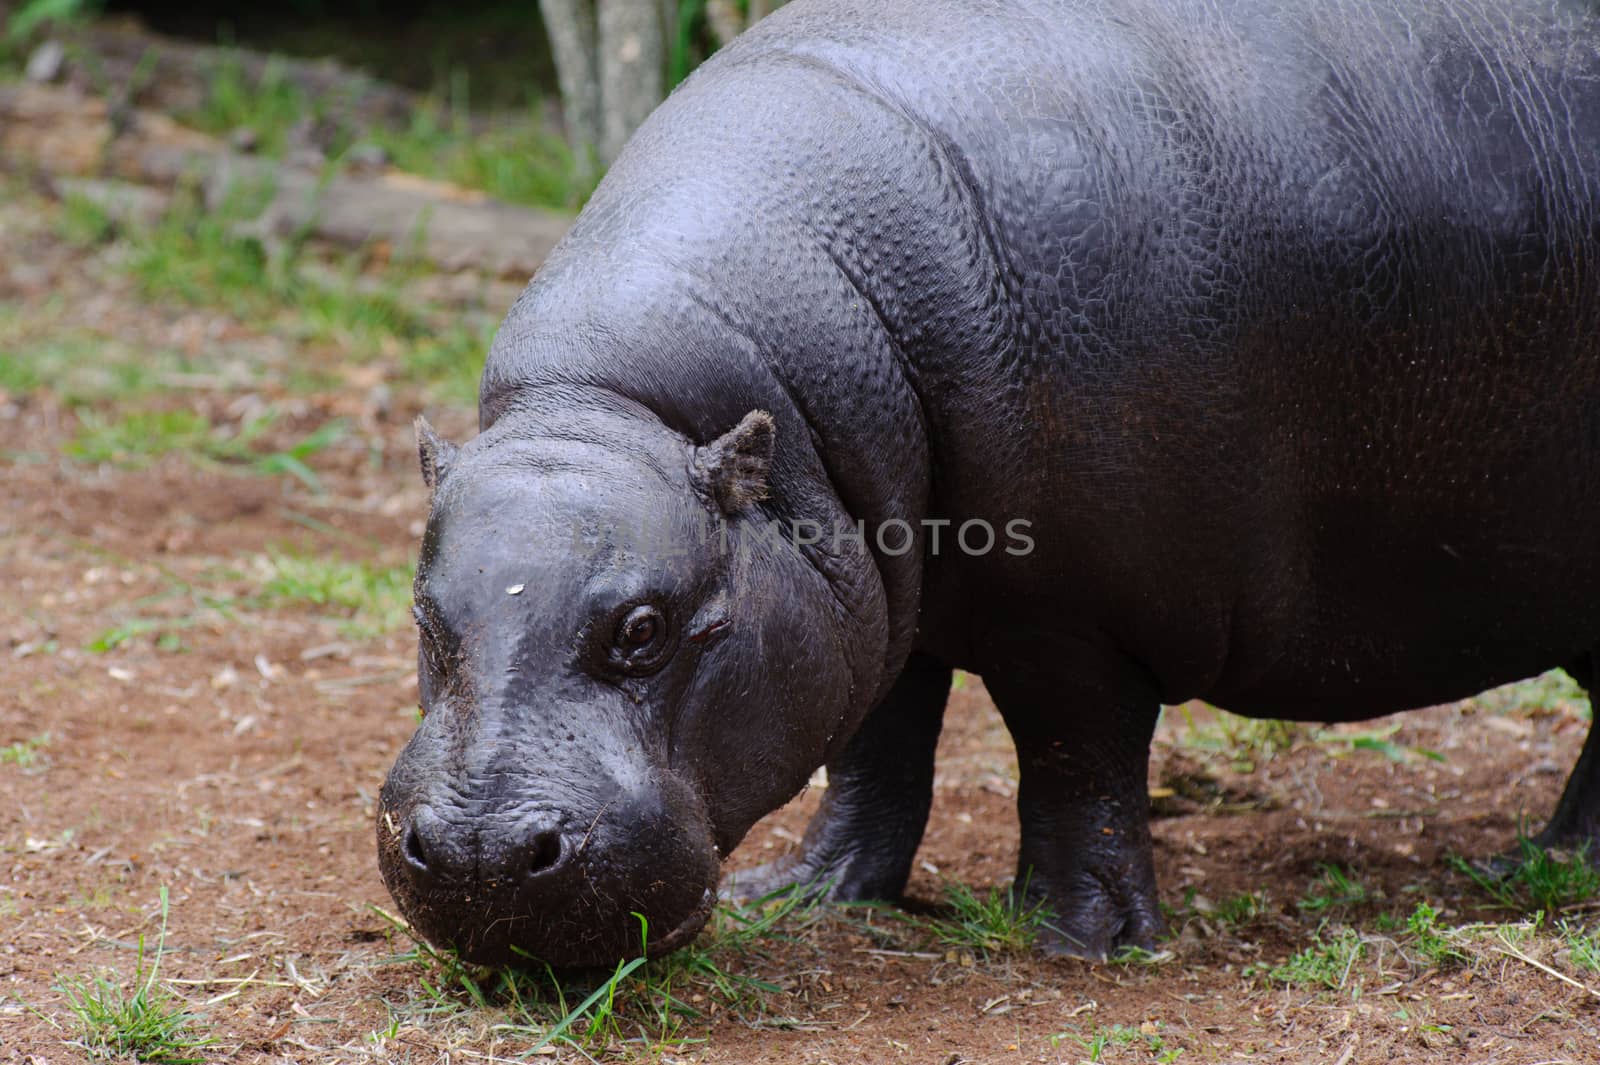 Pygmy hippo standing on grass looks at camera